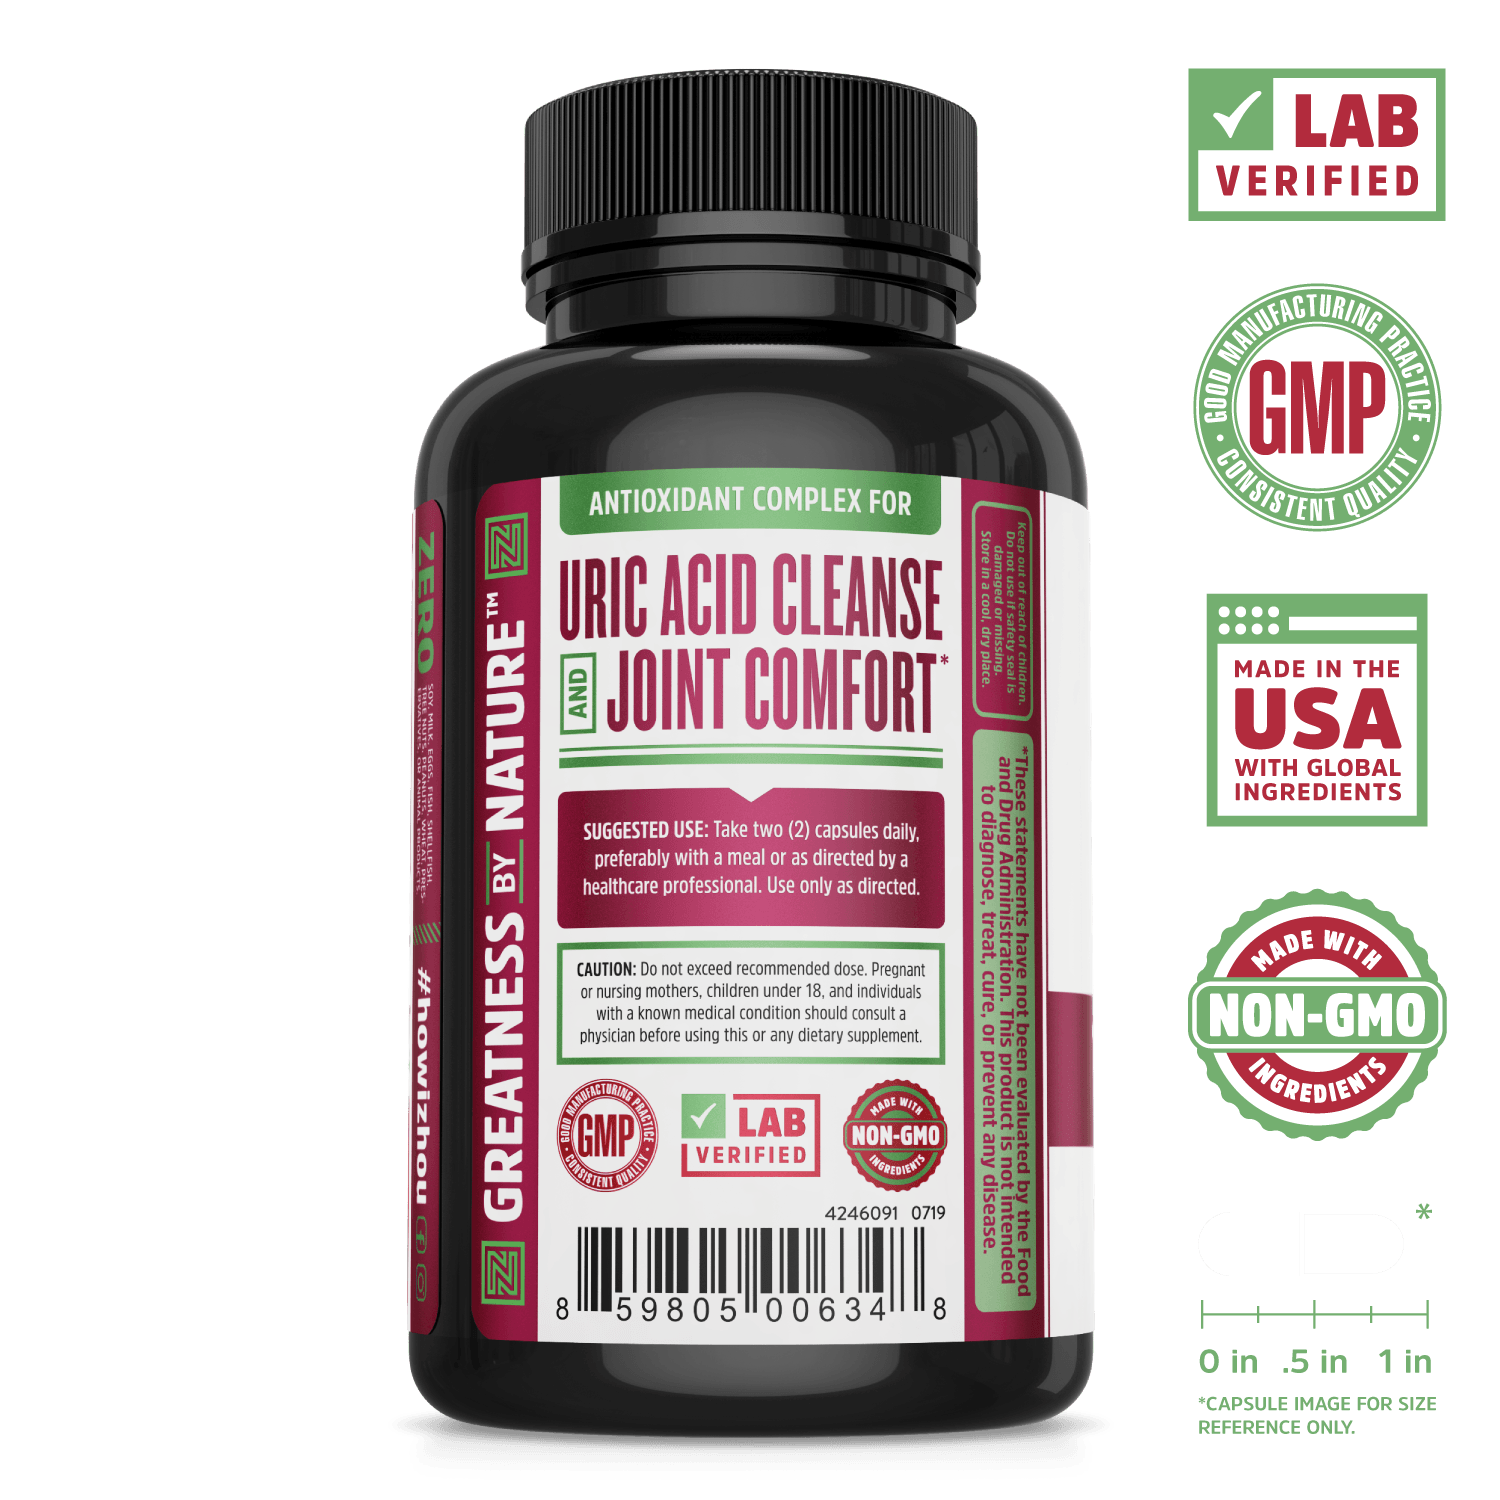 Zhou Nutrition Tart Cherry Extract with Celery Seed Capsules. Bottle side. Lab verified, good manufacturing practices, made in the USA with global ingredients, made with non-GMO ingredients.